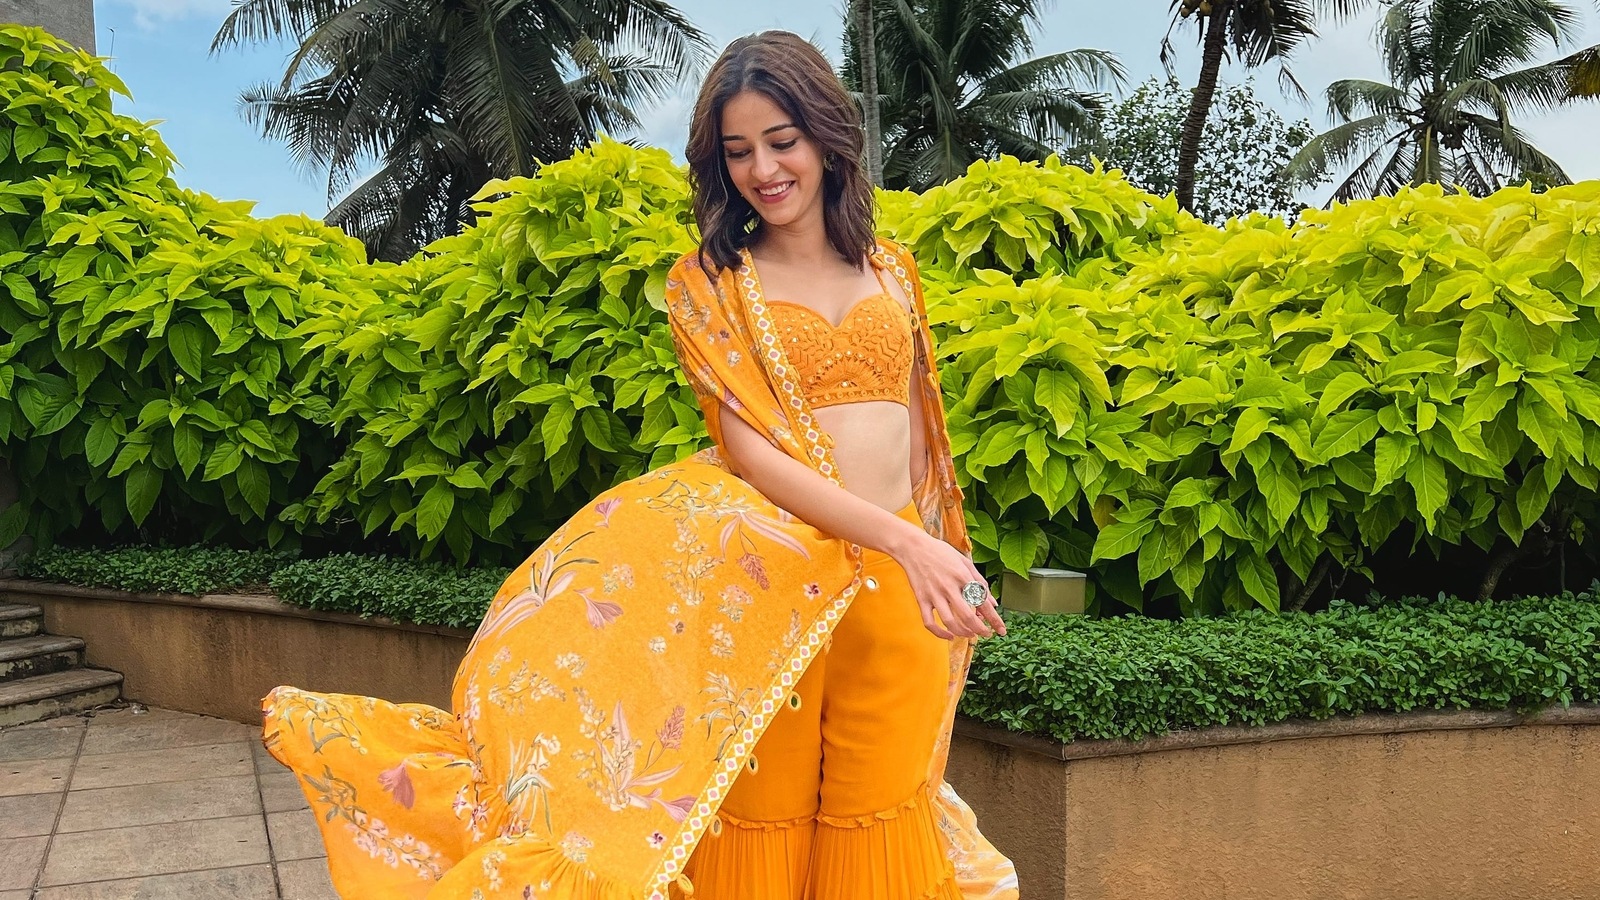 Liger star Ananya Panday is festive fashion inspo, cuts a steamy silhouette in yellow strappy blouse, floral gharara